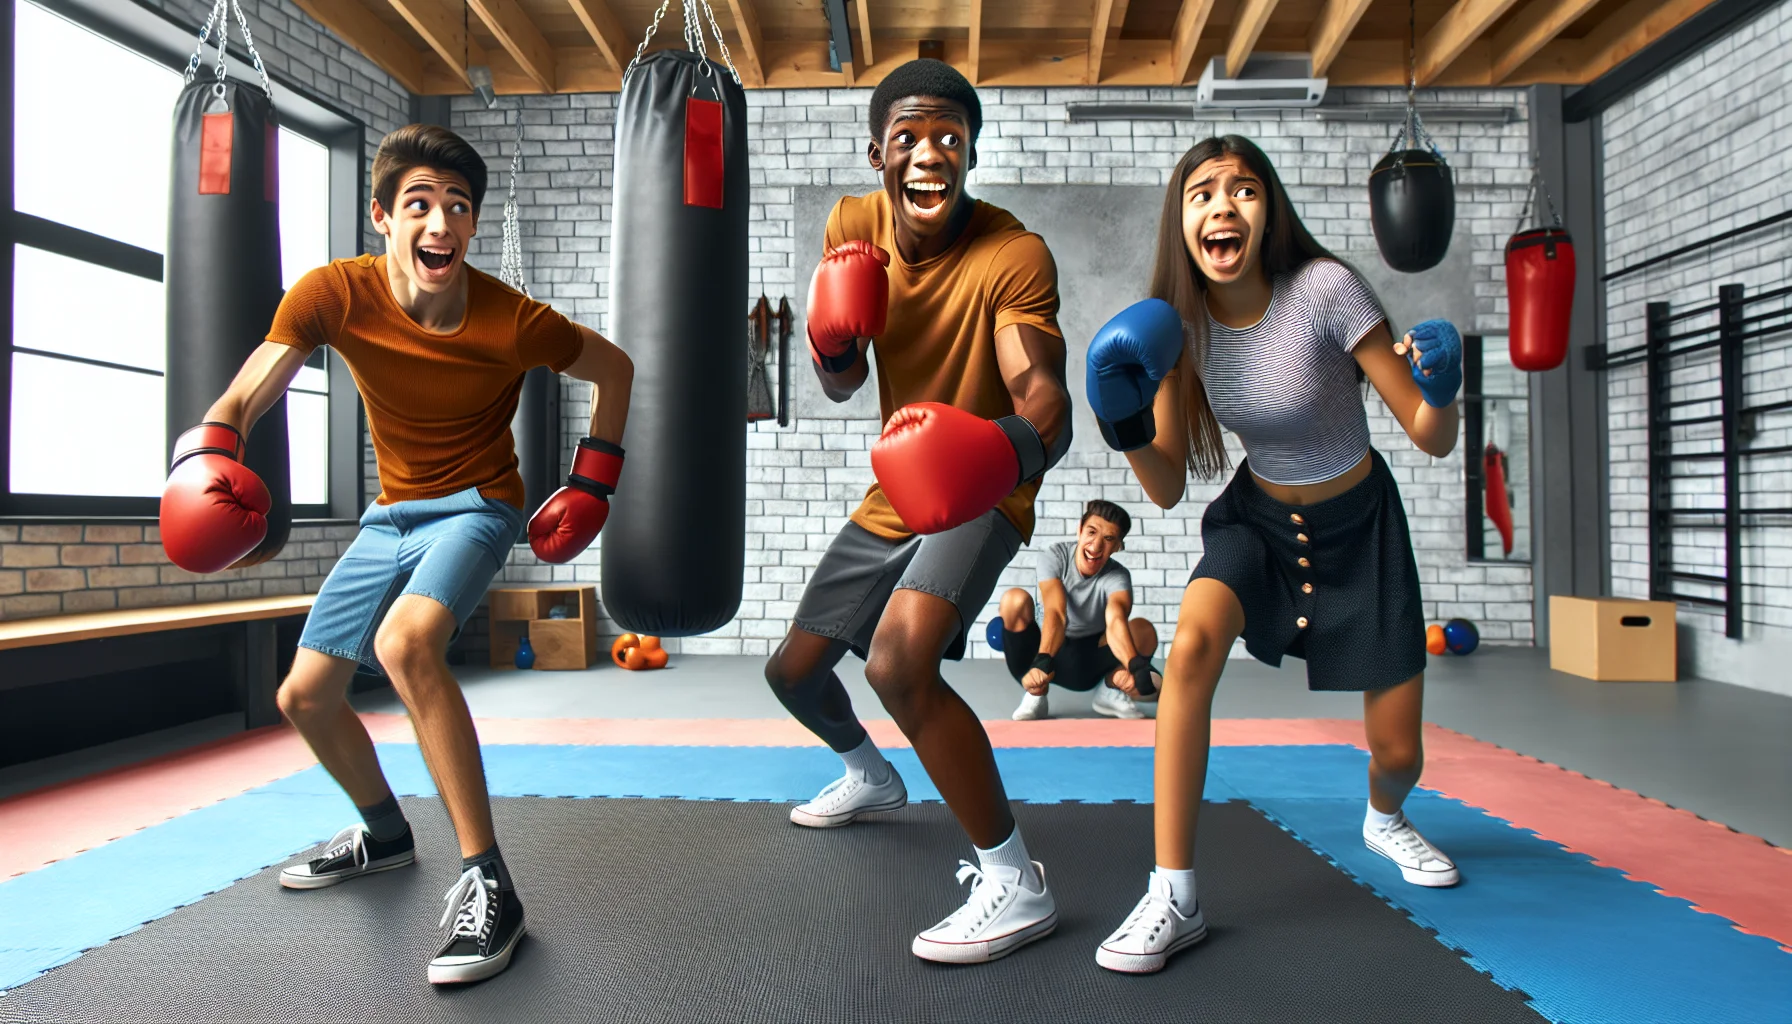 Create an amusing yet inspiring image intended for teenagers, presenting a comical kickboxing scenario that promotes physical exercise. The picture might depict three energetic teenagers of diverse descents - a Hispanic young girl, a Caucasian boy, and a Black teenager boy - in a local community center's kickboxing gym. They could be trying their best to follow the kickboxing instructor's moves but somehow comically failing at it while laughing their hearts out. The backdrop of this lively scene could be a modern, colorful gym with punch bags, gloves, and mirrors reflecting the humorous antics of the teens.